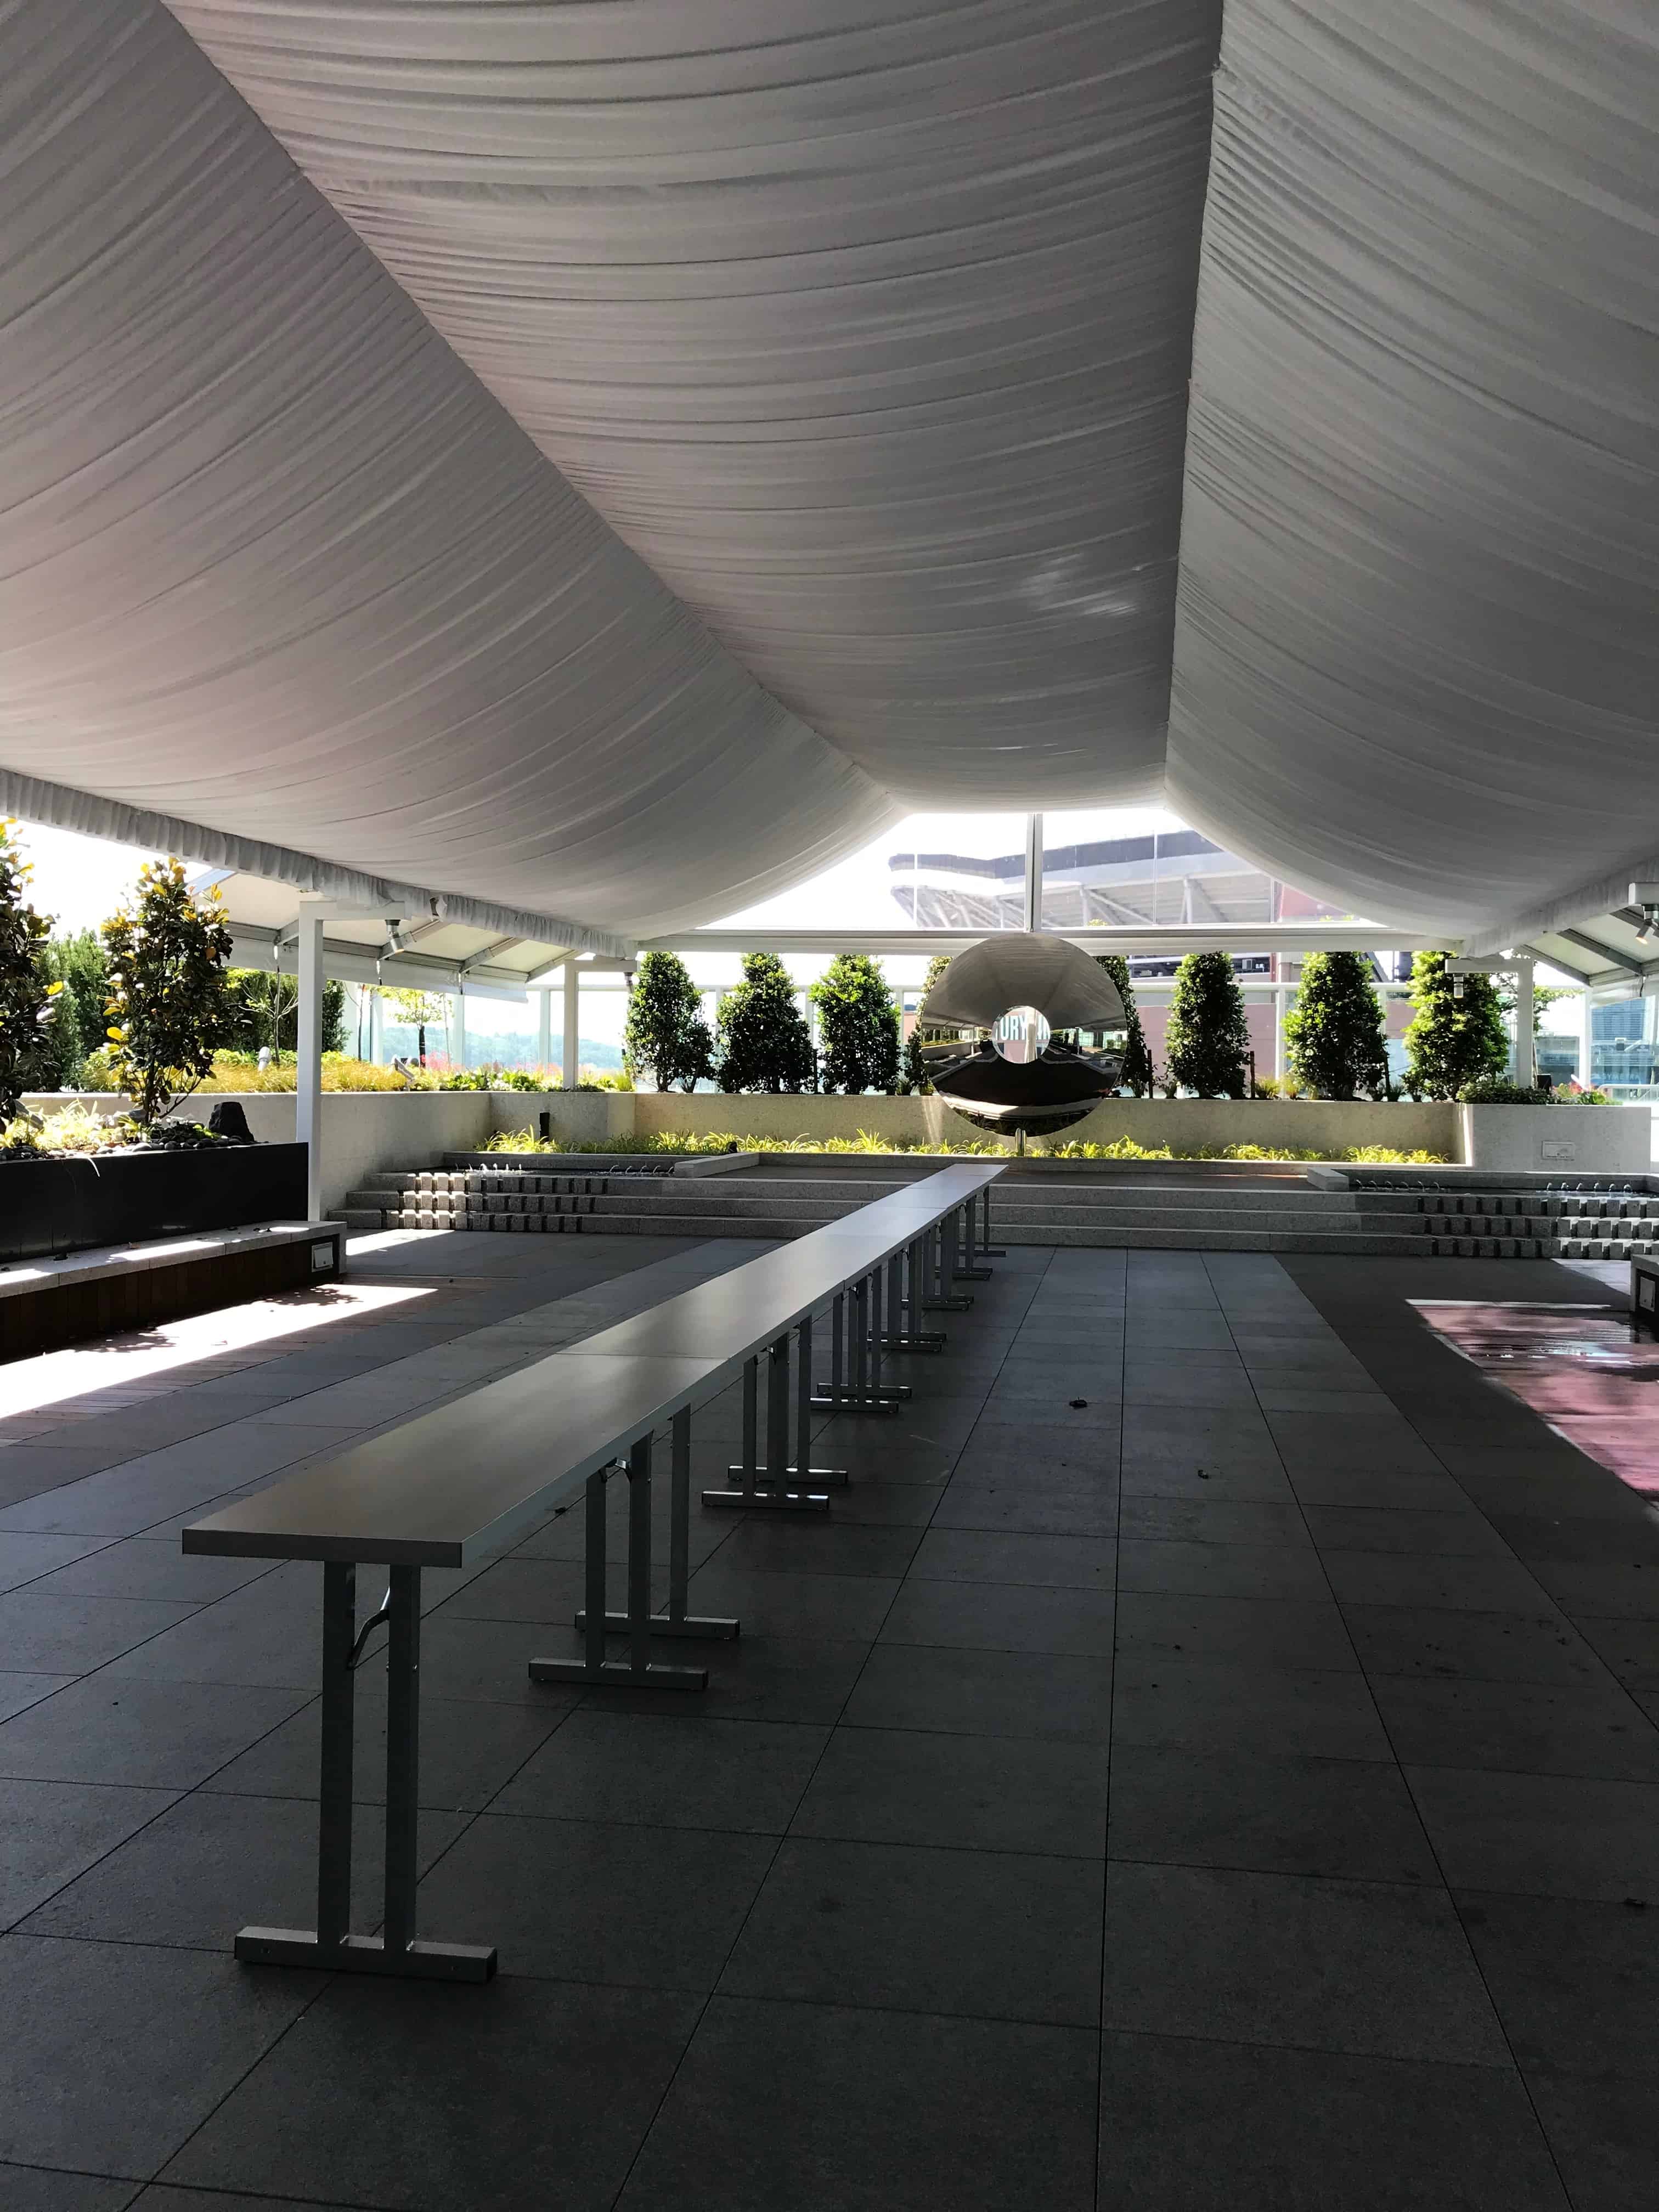 Outdoor Space for Events